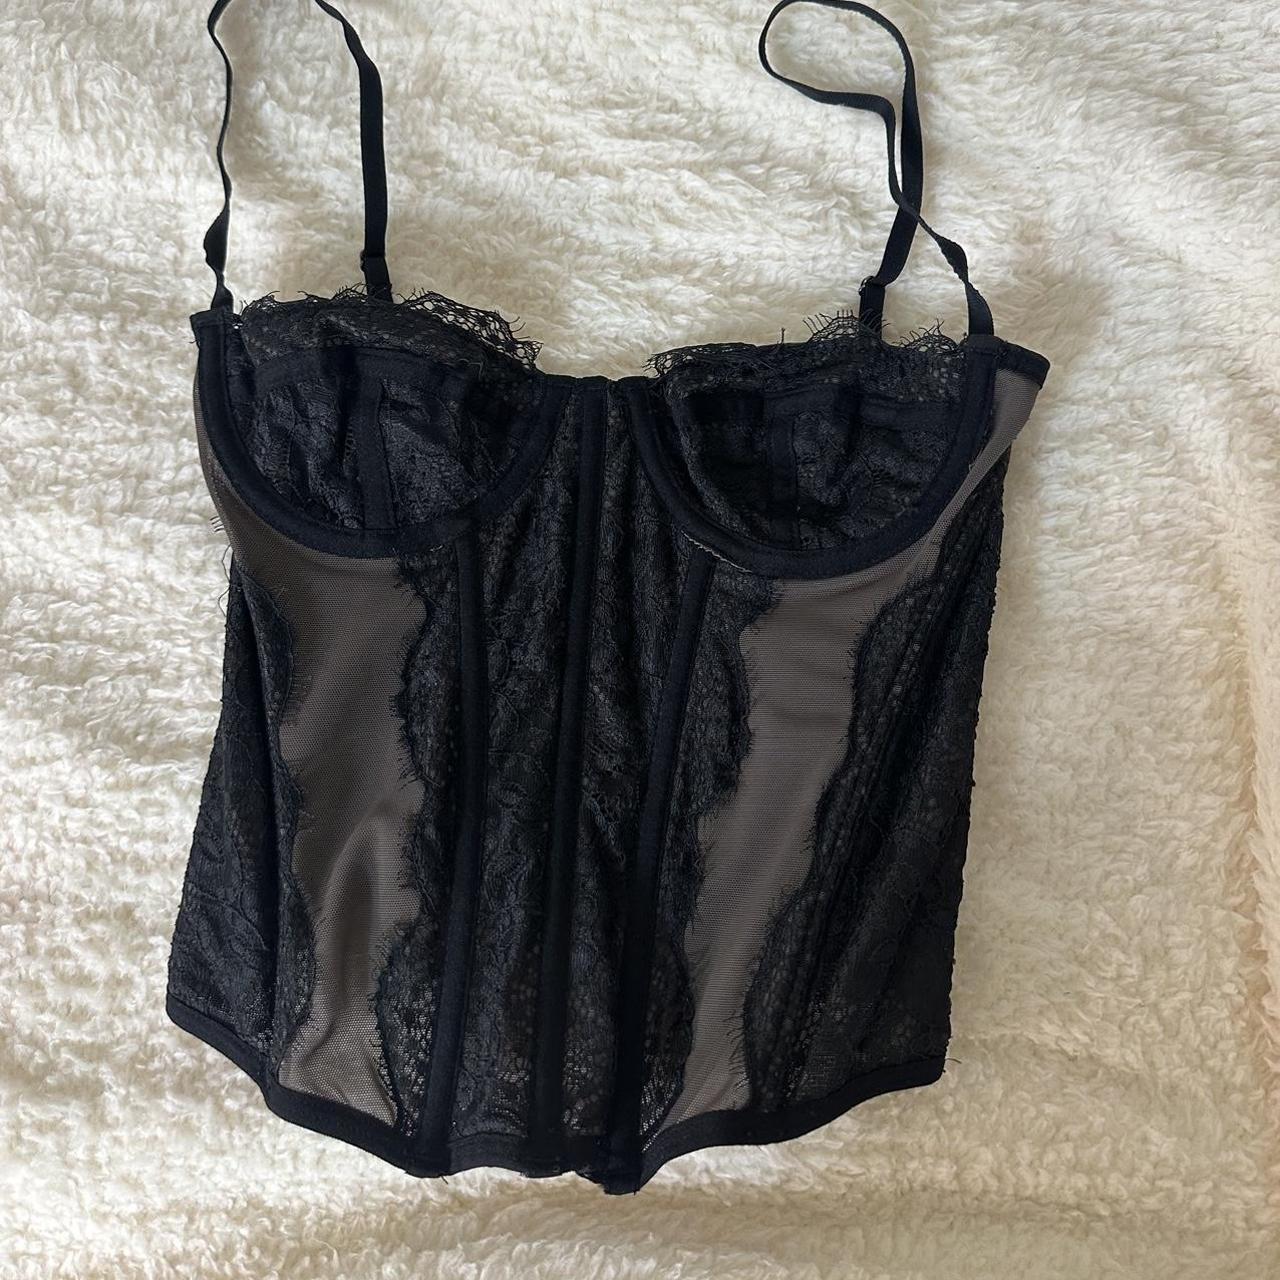 urban outfitters black corset size XS - Depop